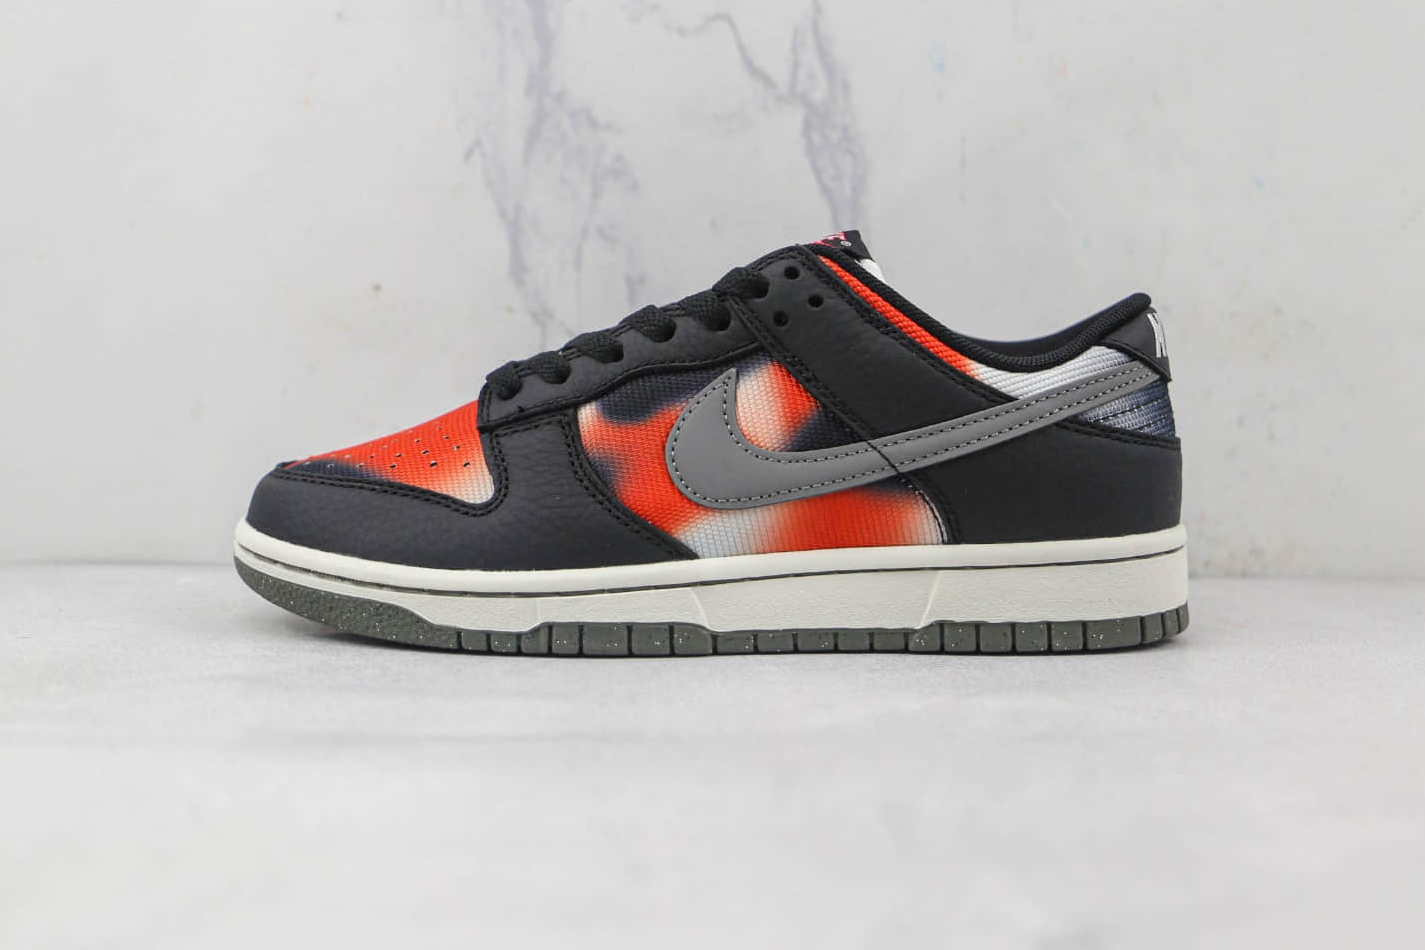 Nike Dunk Low 'Graffiti Pack - Black Red' DM0108-001 - Stylish and Bold Sneakers